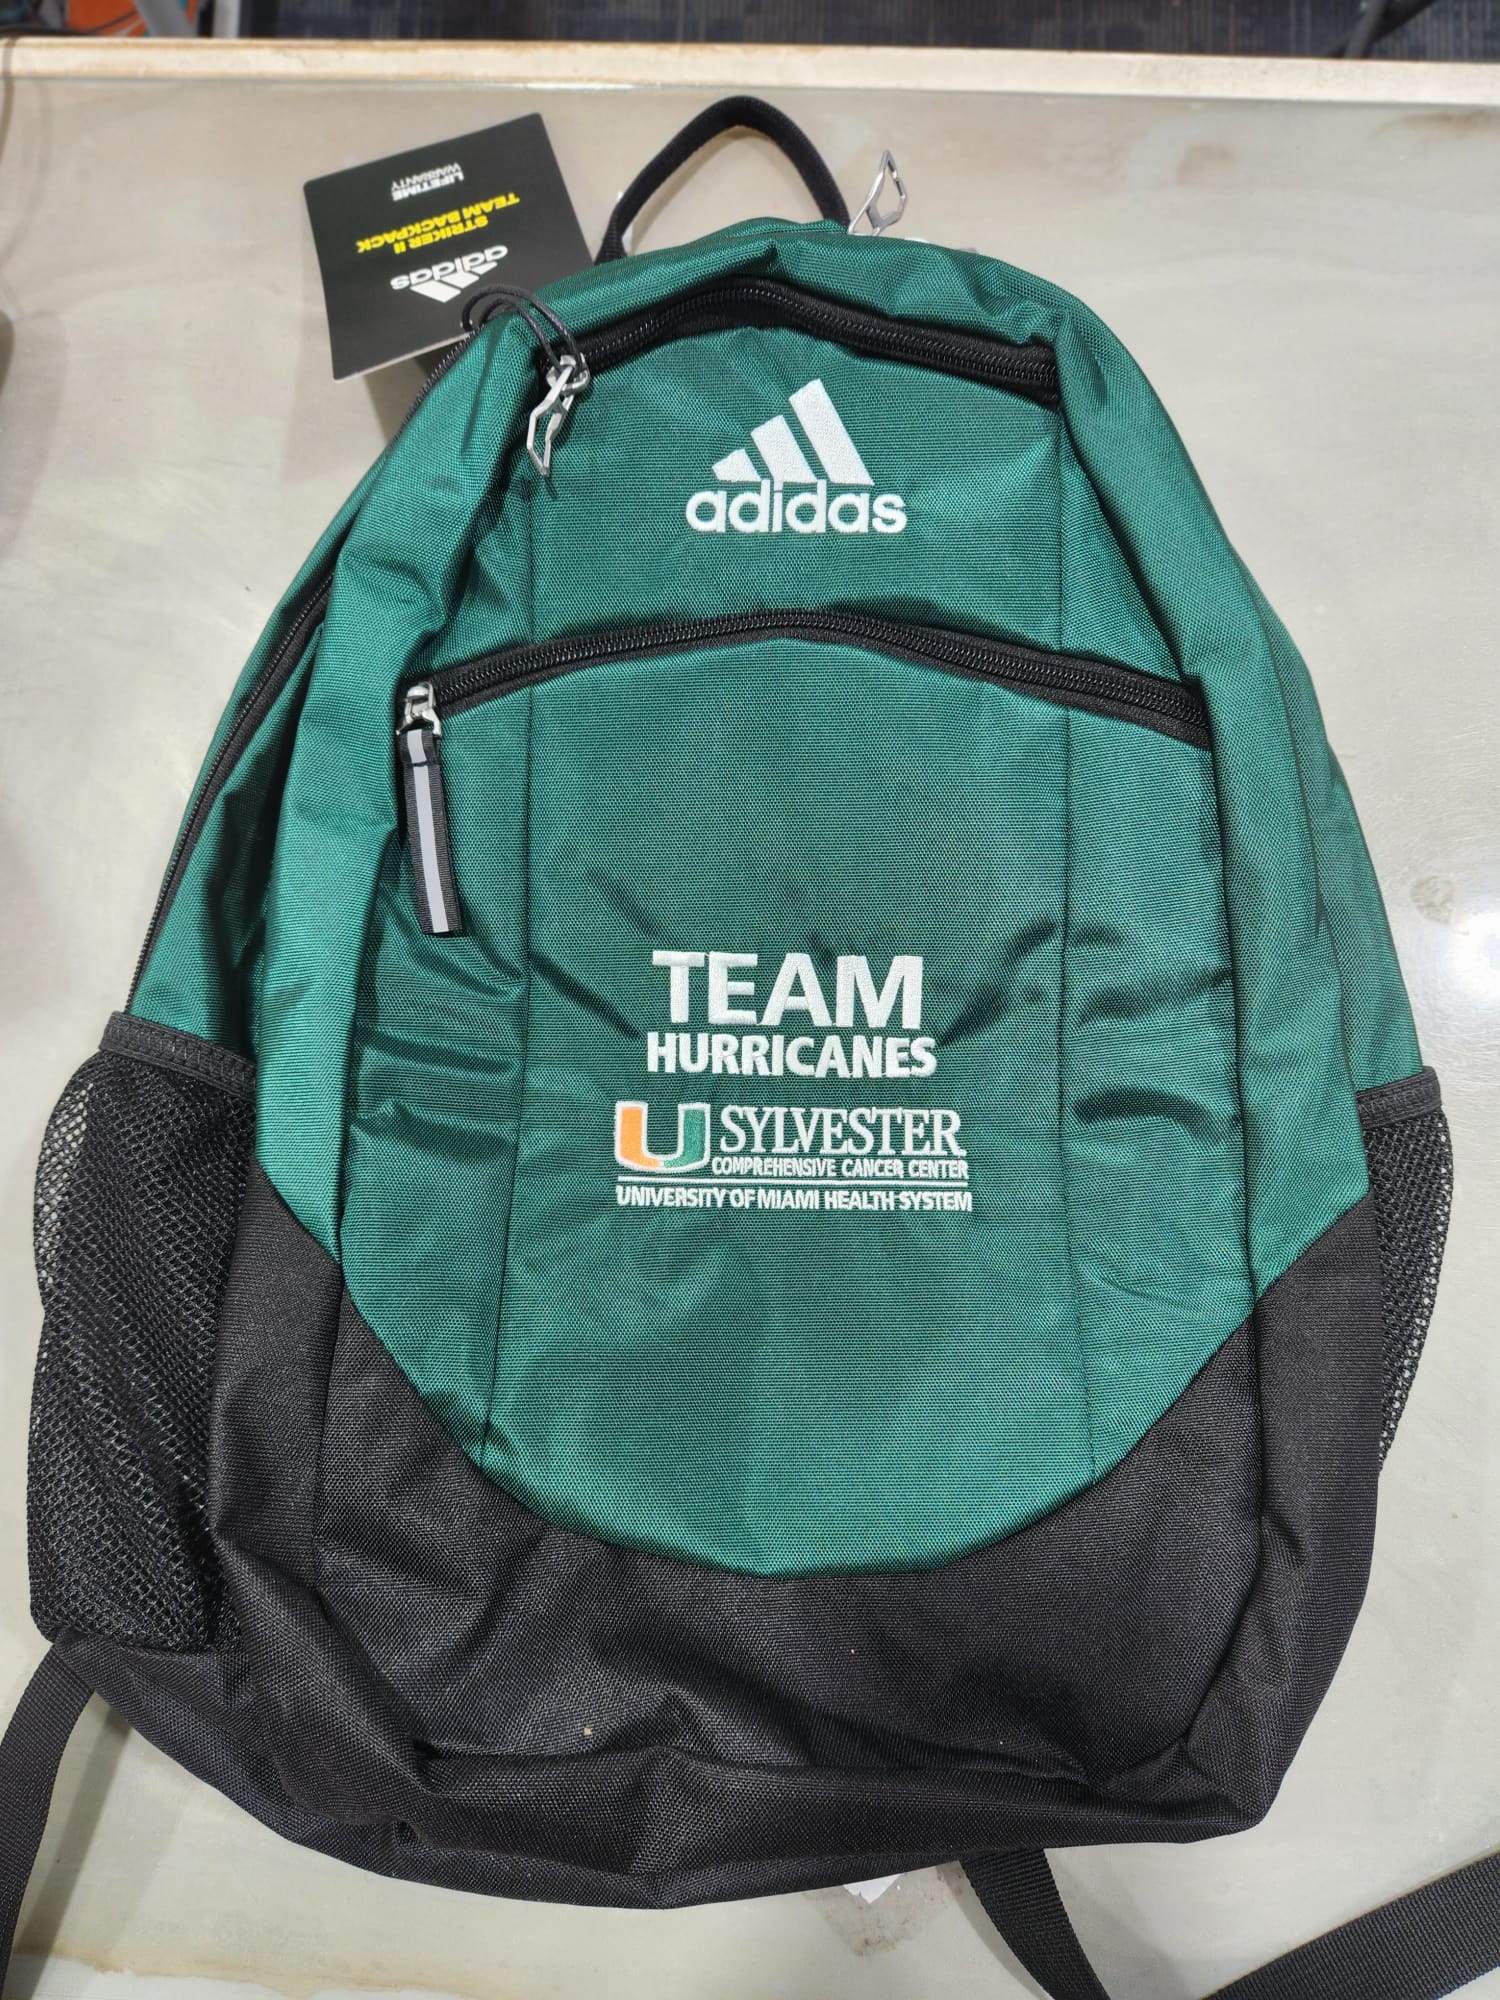 Team Hurricanes DCC adidas Backpack - Green